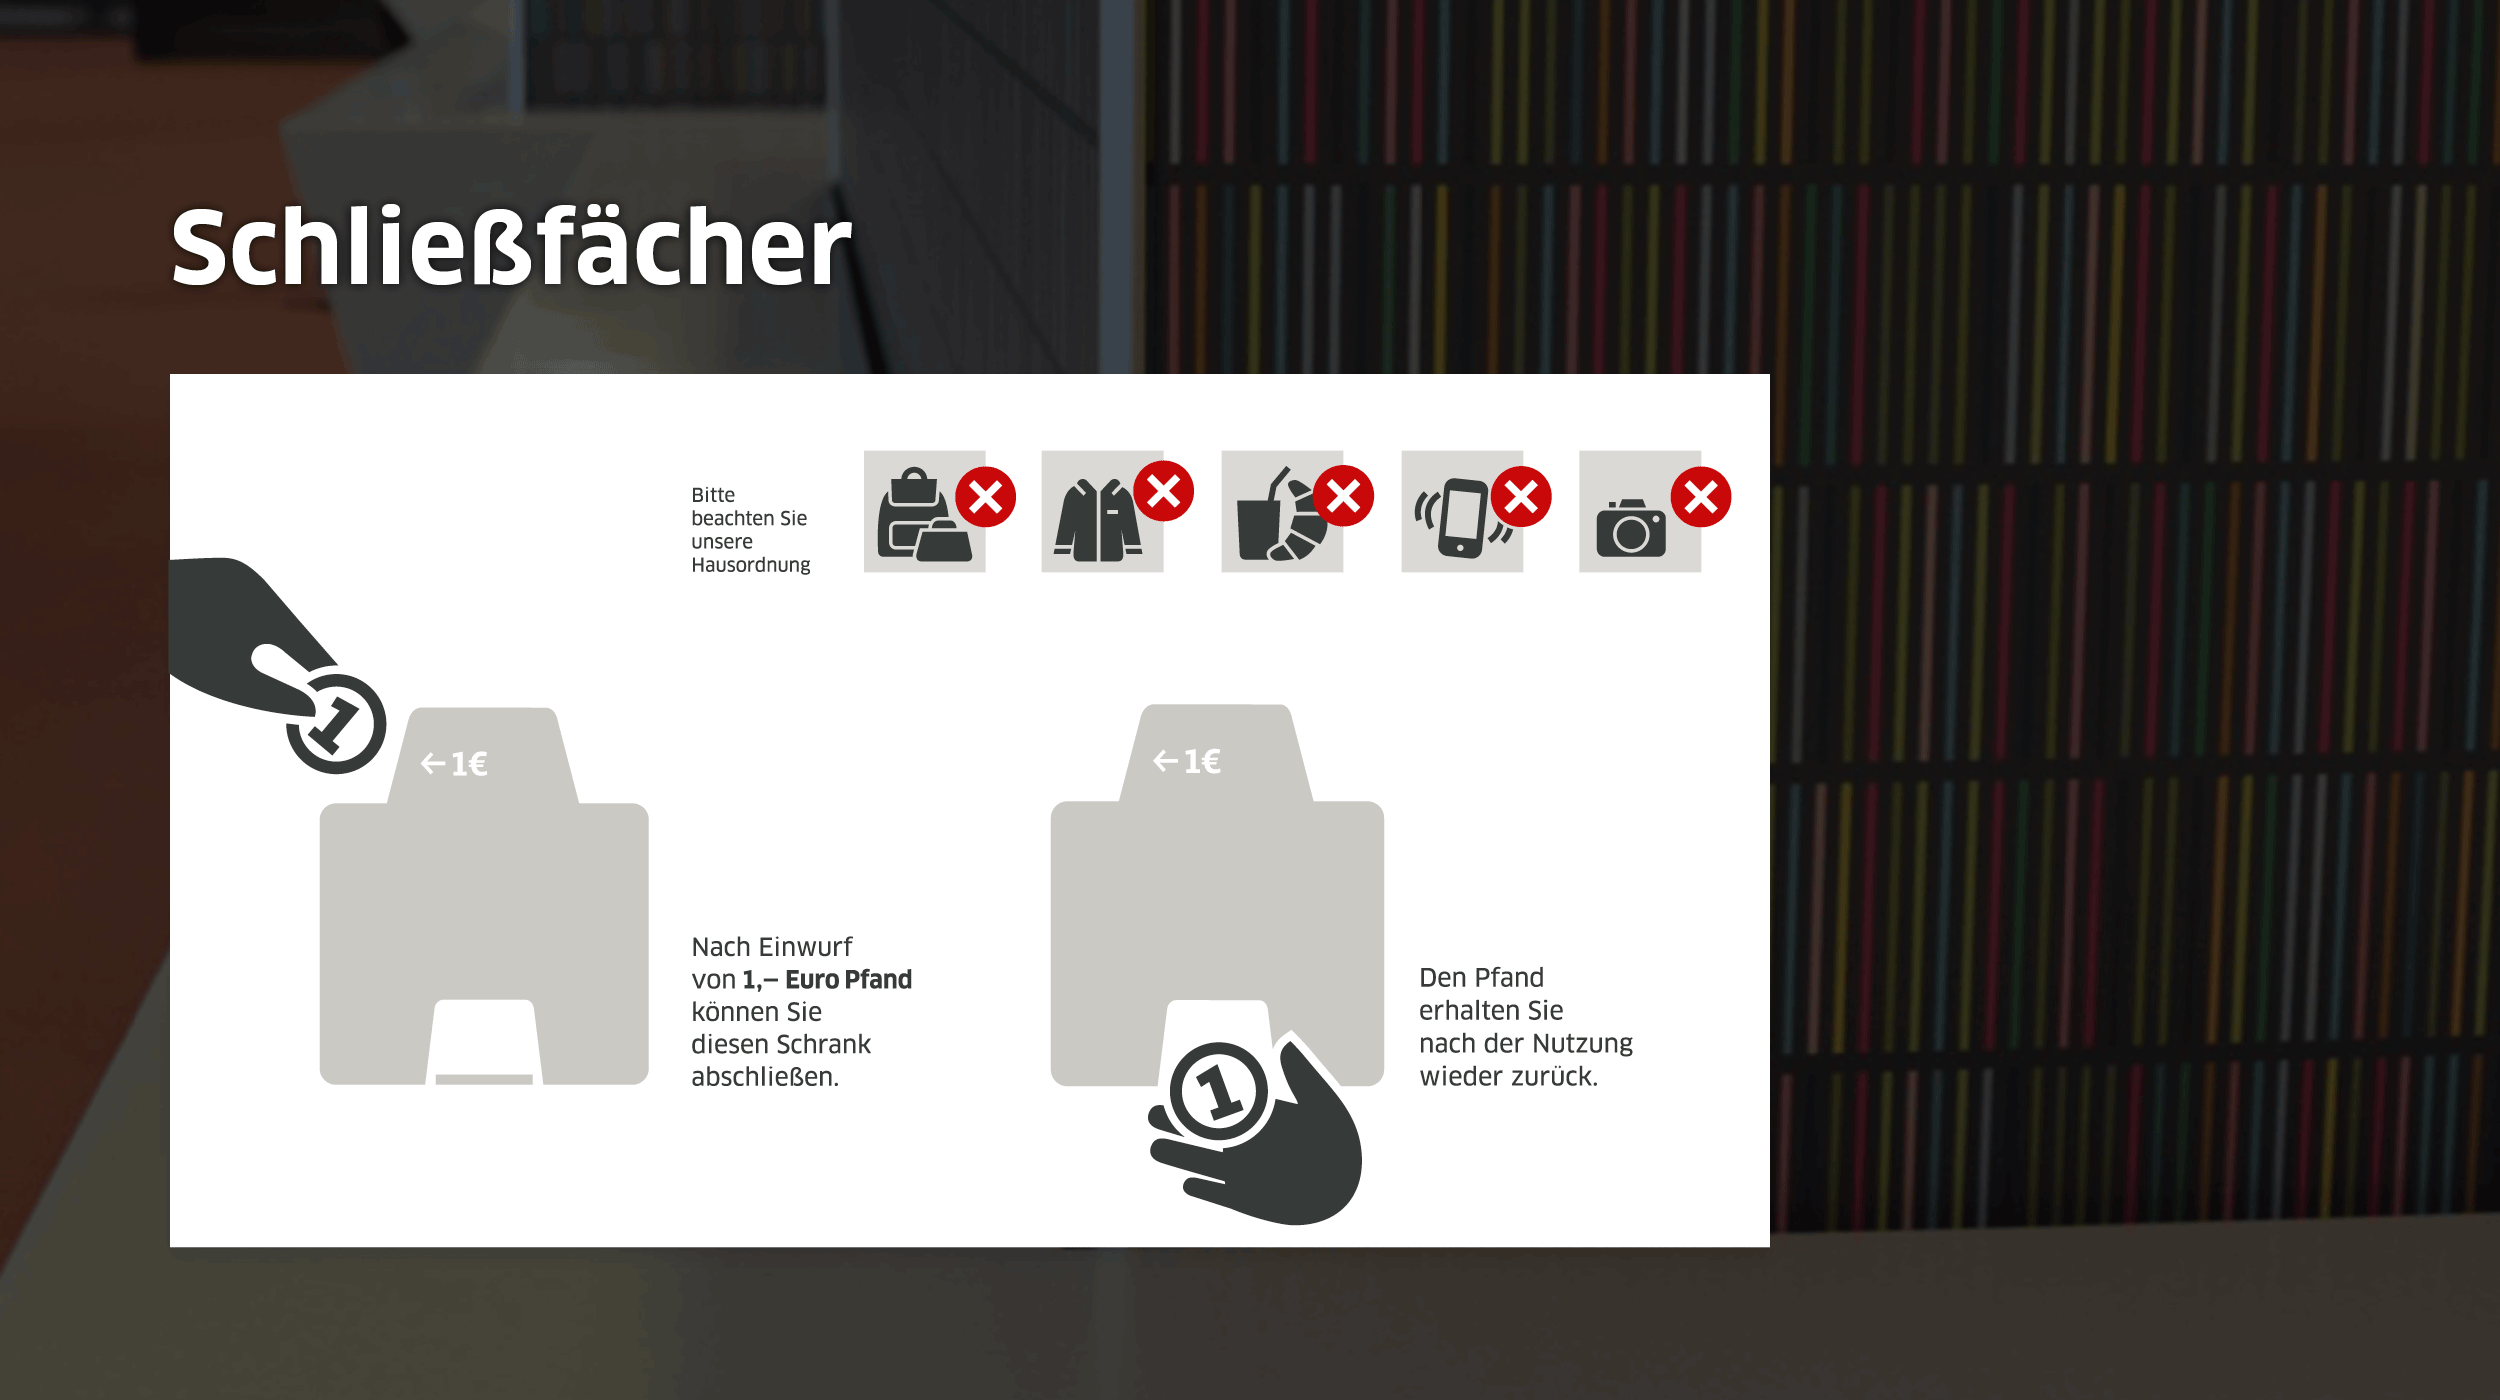 Operating instructions for the lockers with infographics and text